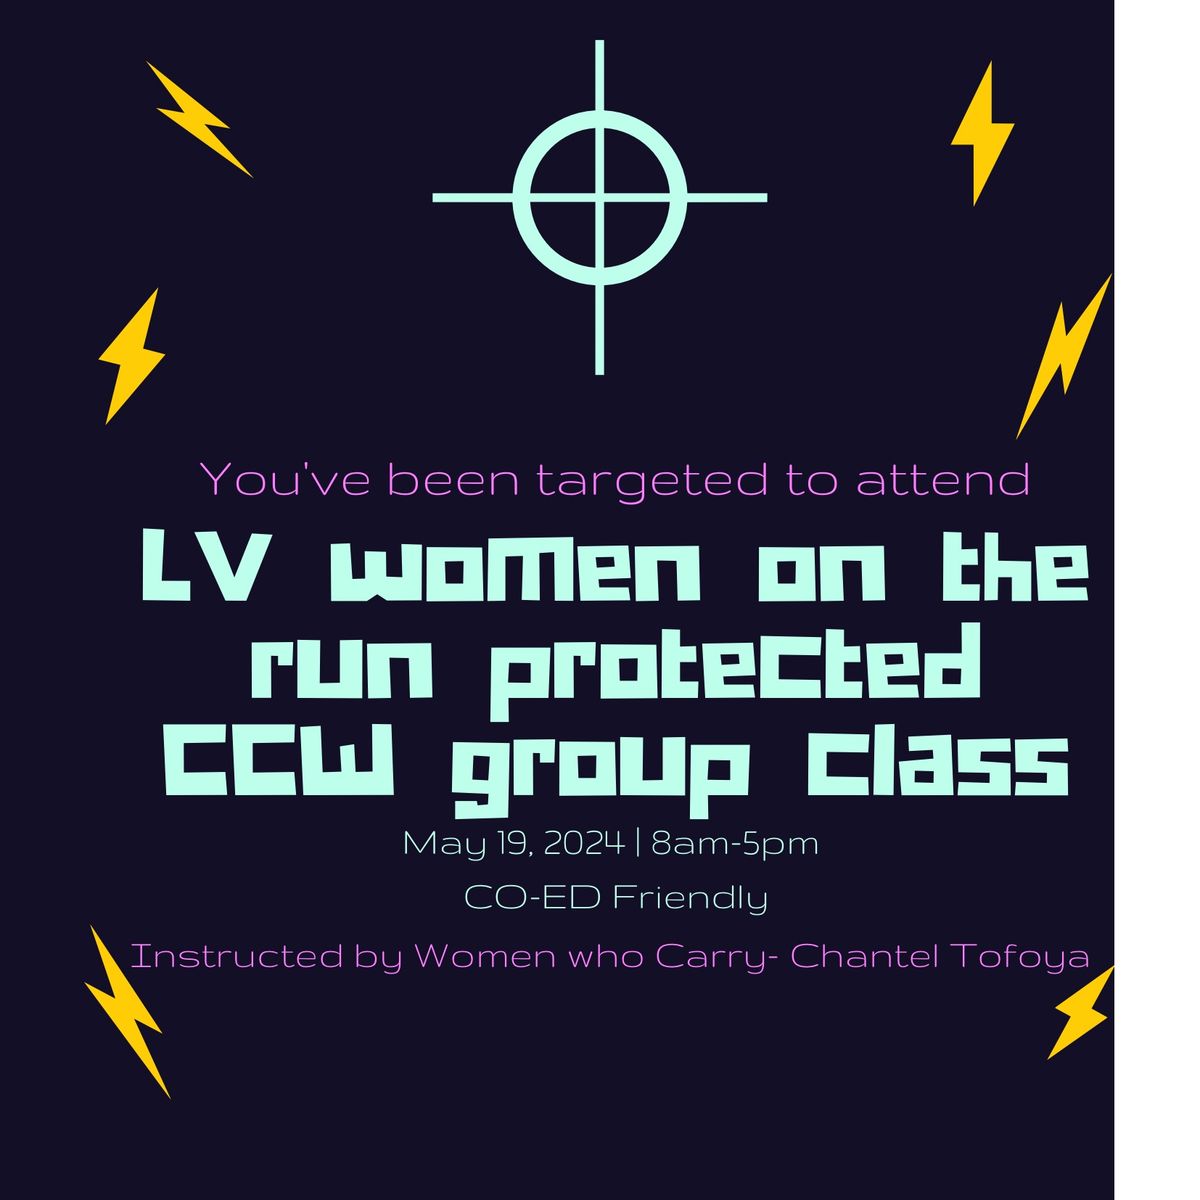 Lv Women on the run protected a CCW group class  